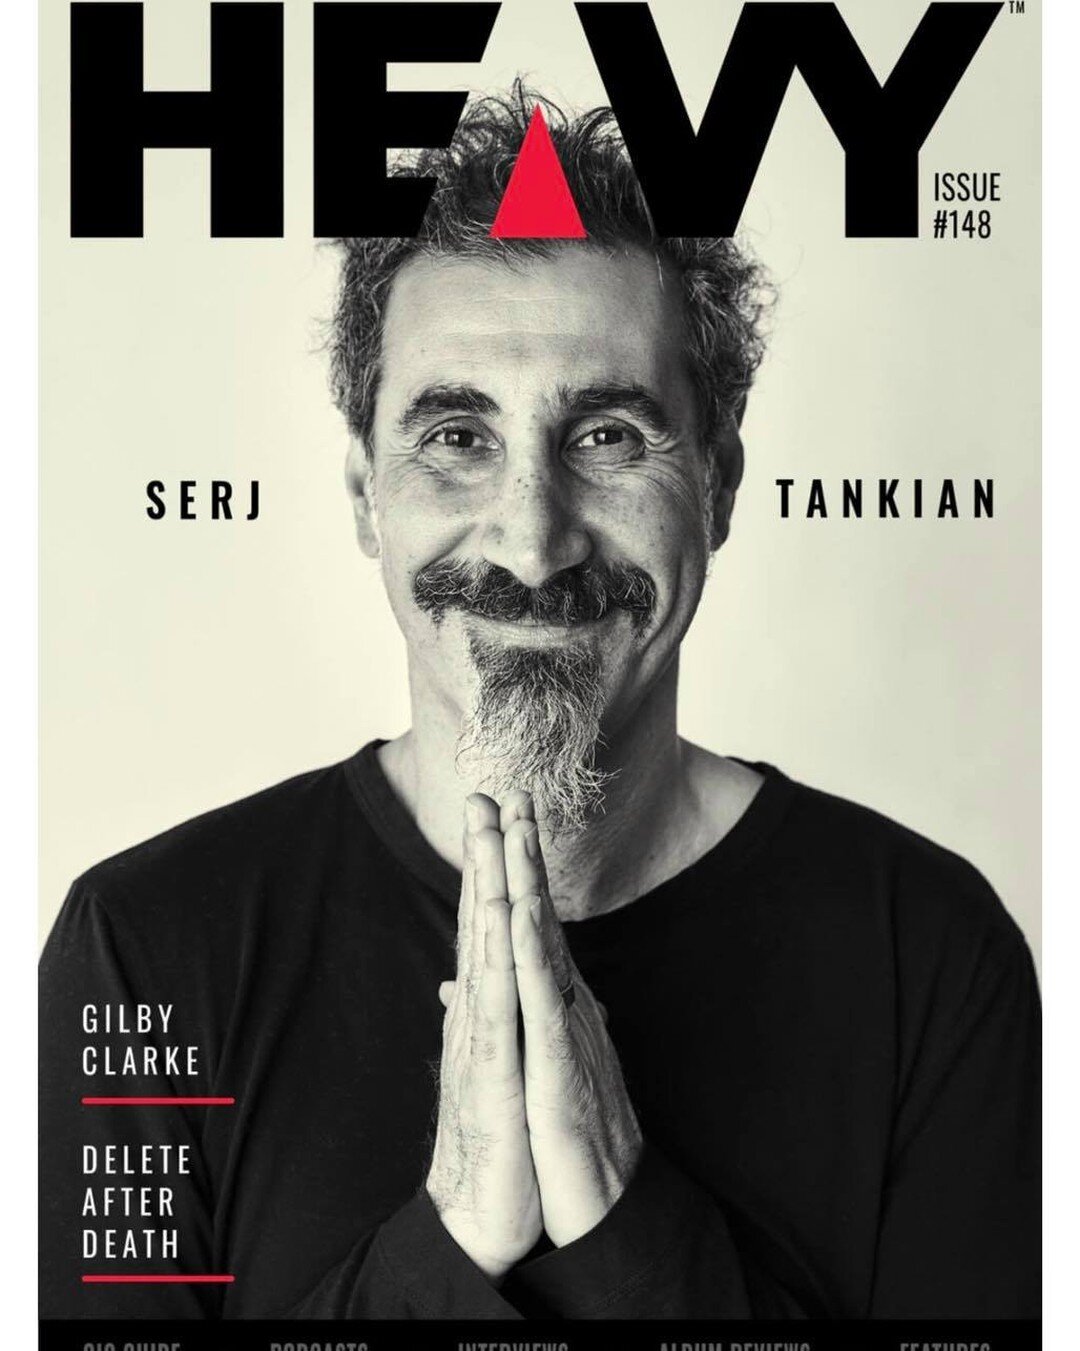 Delete After Death on the cover of HEAVY Magazine with Serj Tankian and Gilby Clark. Huge Thanks again to Kris Peters at Heavy Magazine for the interview and cover feature!

#heavymetal #hardrockmusic #metalhead #rollsroyce #dogecoin #doge #bitcoin #